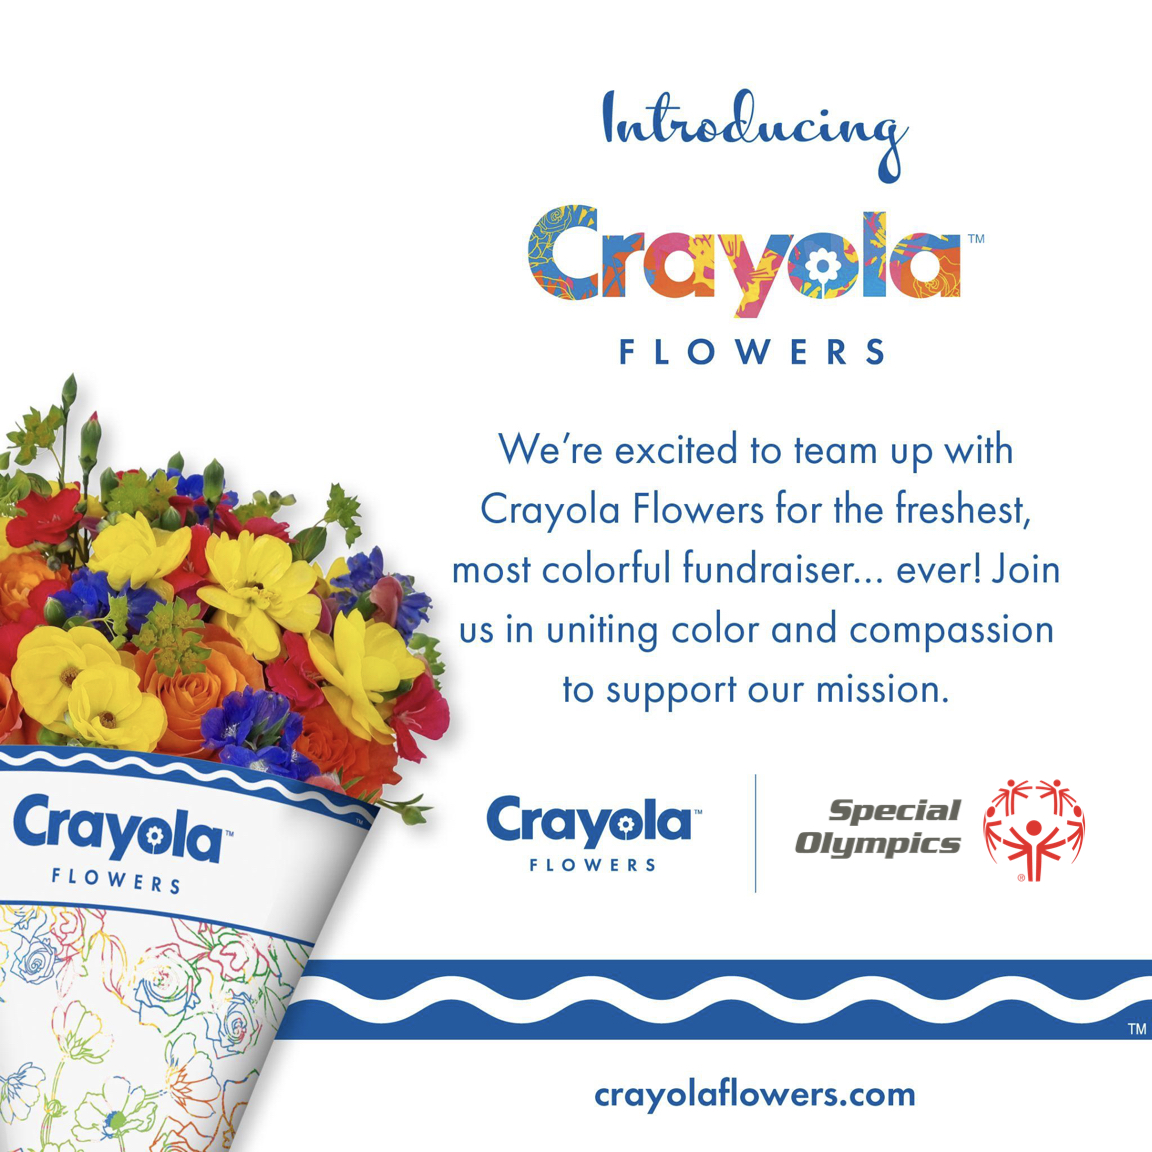 Flowers are the ideal gift for any holiday or special occasion, and you can always find them in the perfect color for that special someone! When you send a bouquet from our @crayolaflowers shop, your gift gives back to #SpecialOlympics! brnw.ch/21wJC9l #CrayolaFlowers